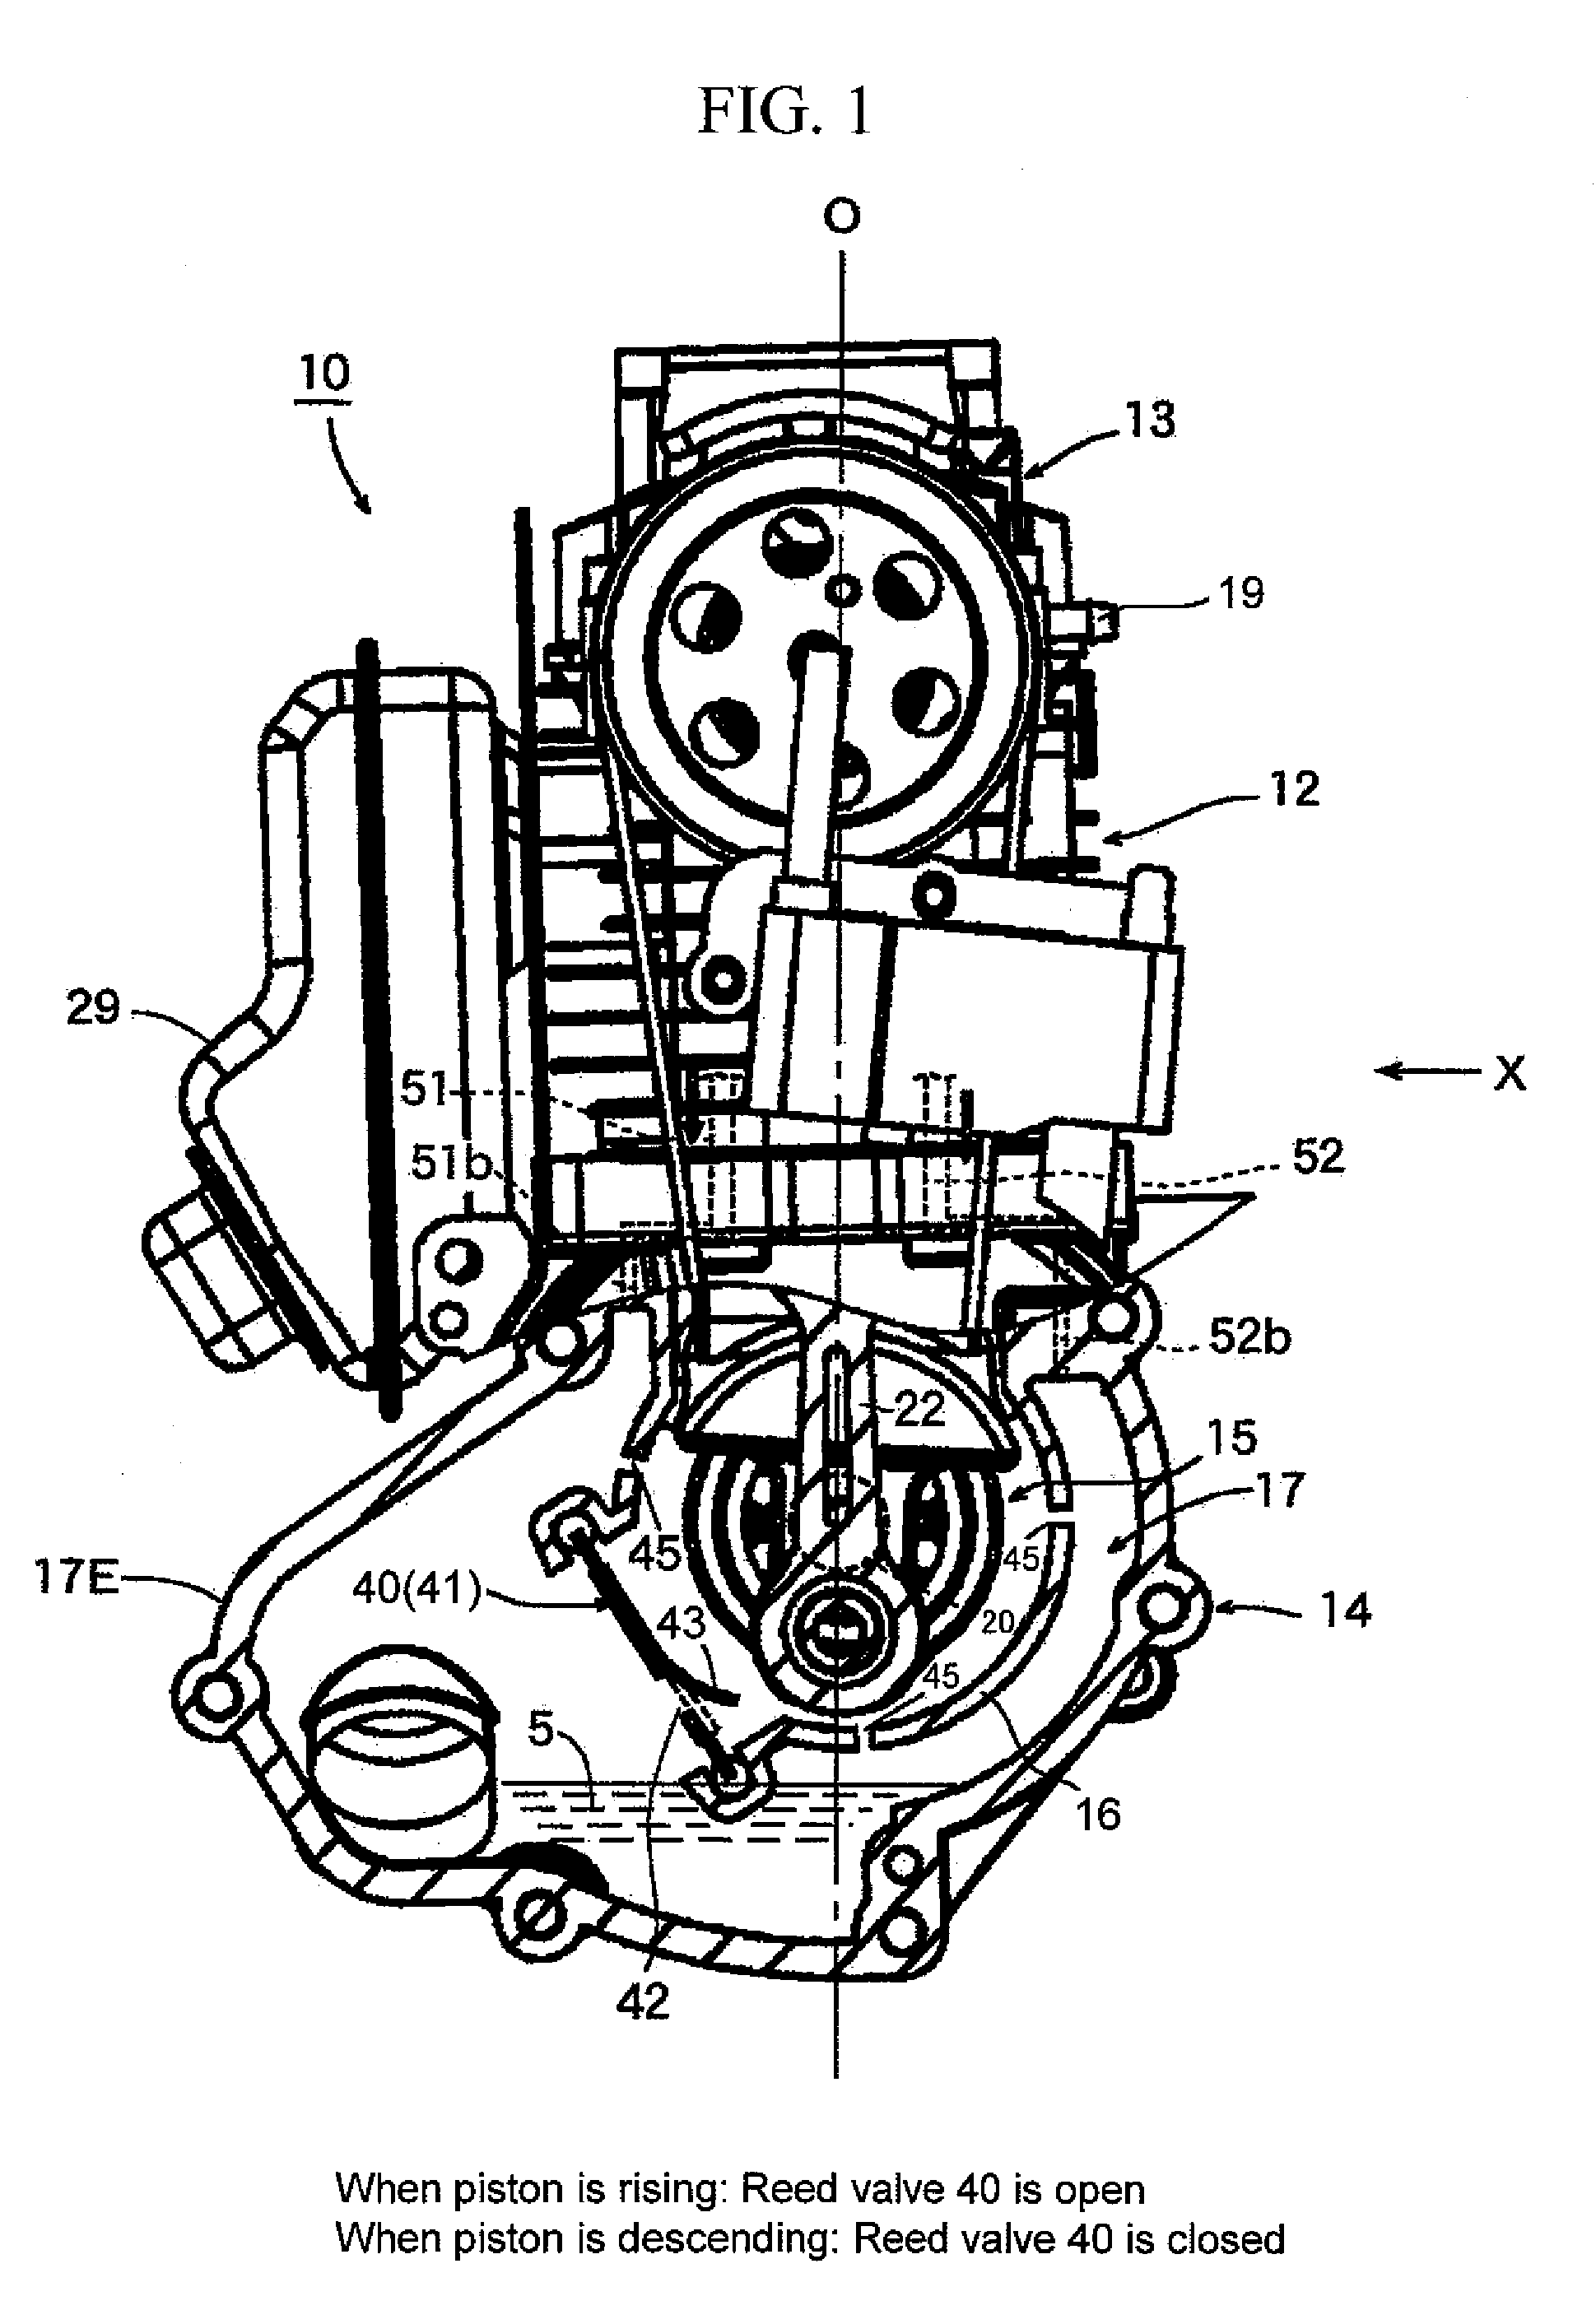 Four-stroke internal combustion engine lubrication device